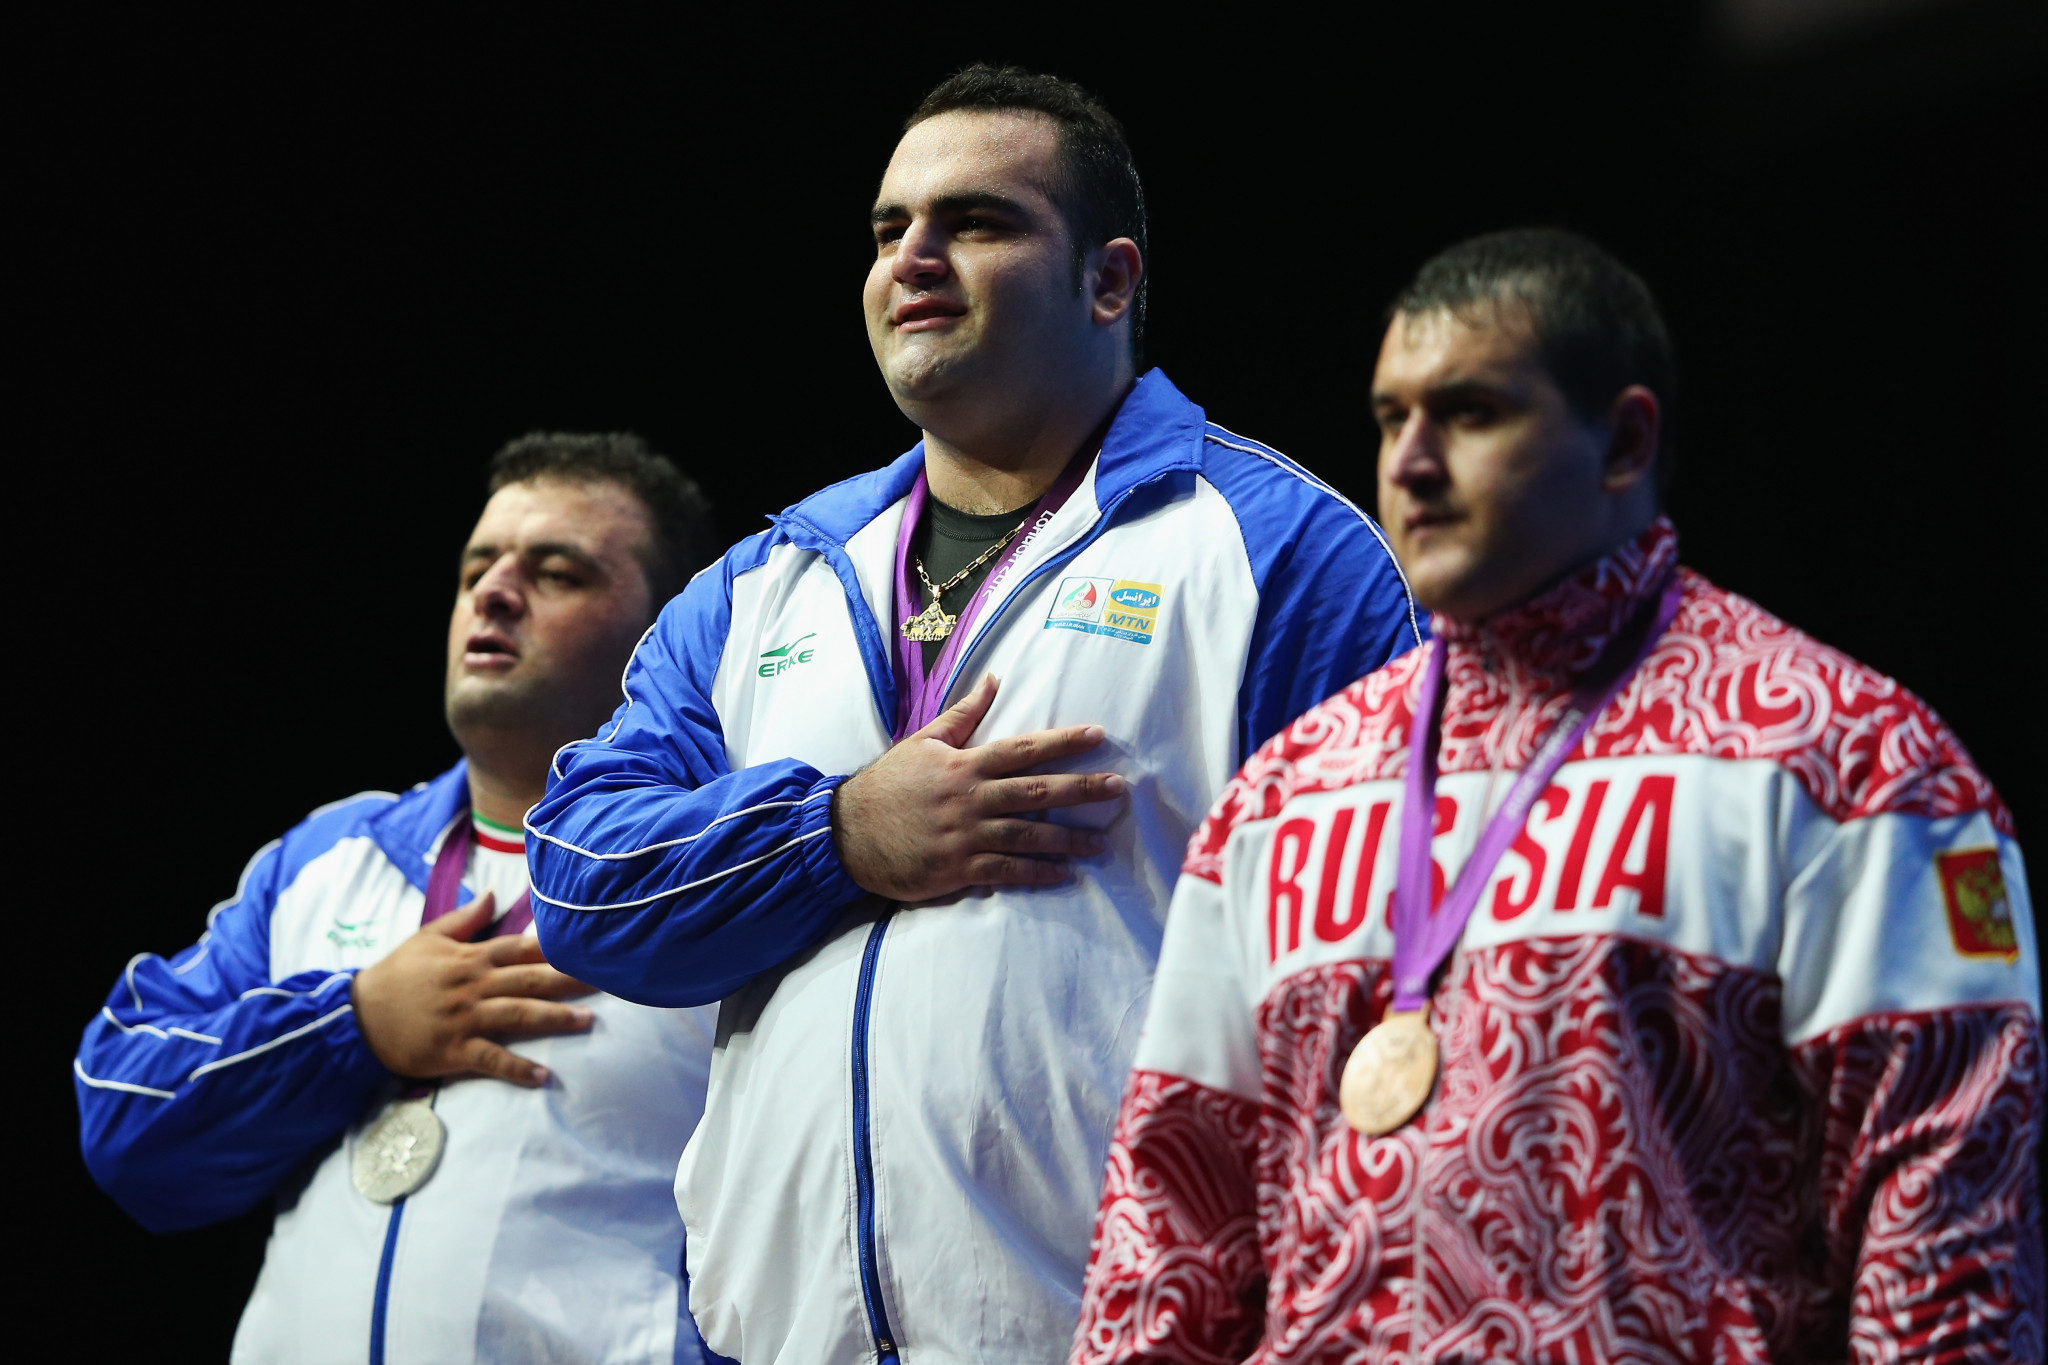 Ruslan Albegov, right, pictured with his two fellow medallists from Iran celebrating Olympic bronze at London 2012 ©Getty Images